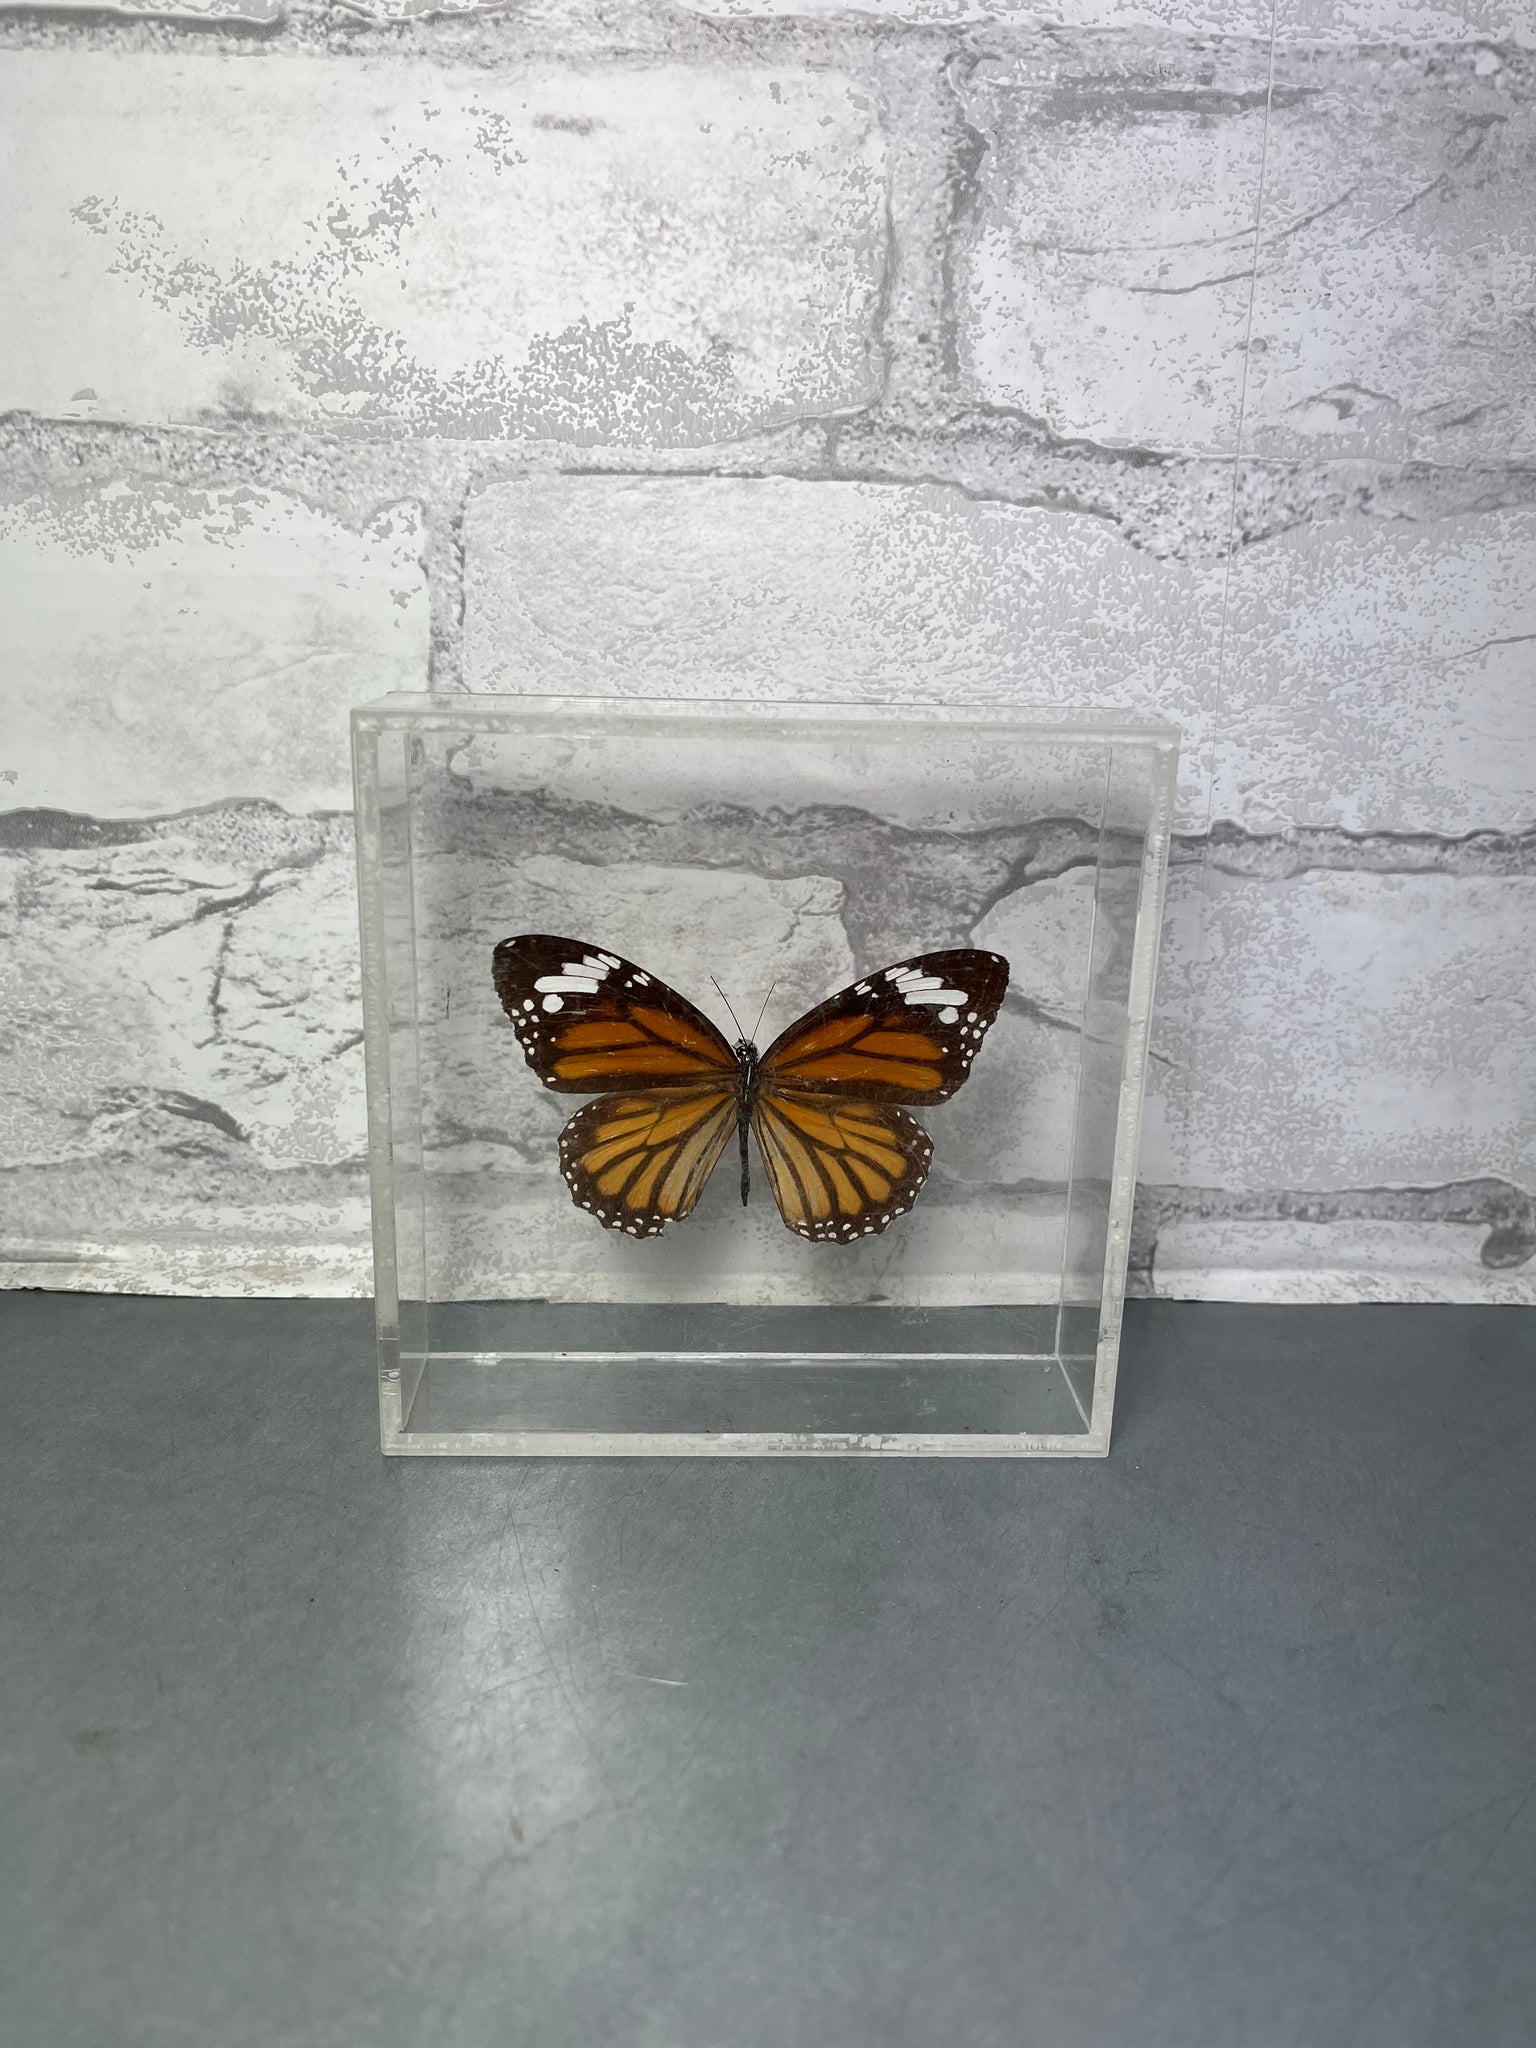 Preserved Monarch Butterfly In Acrylic Box Vintage Mid Century